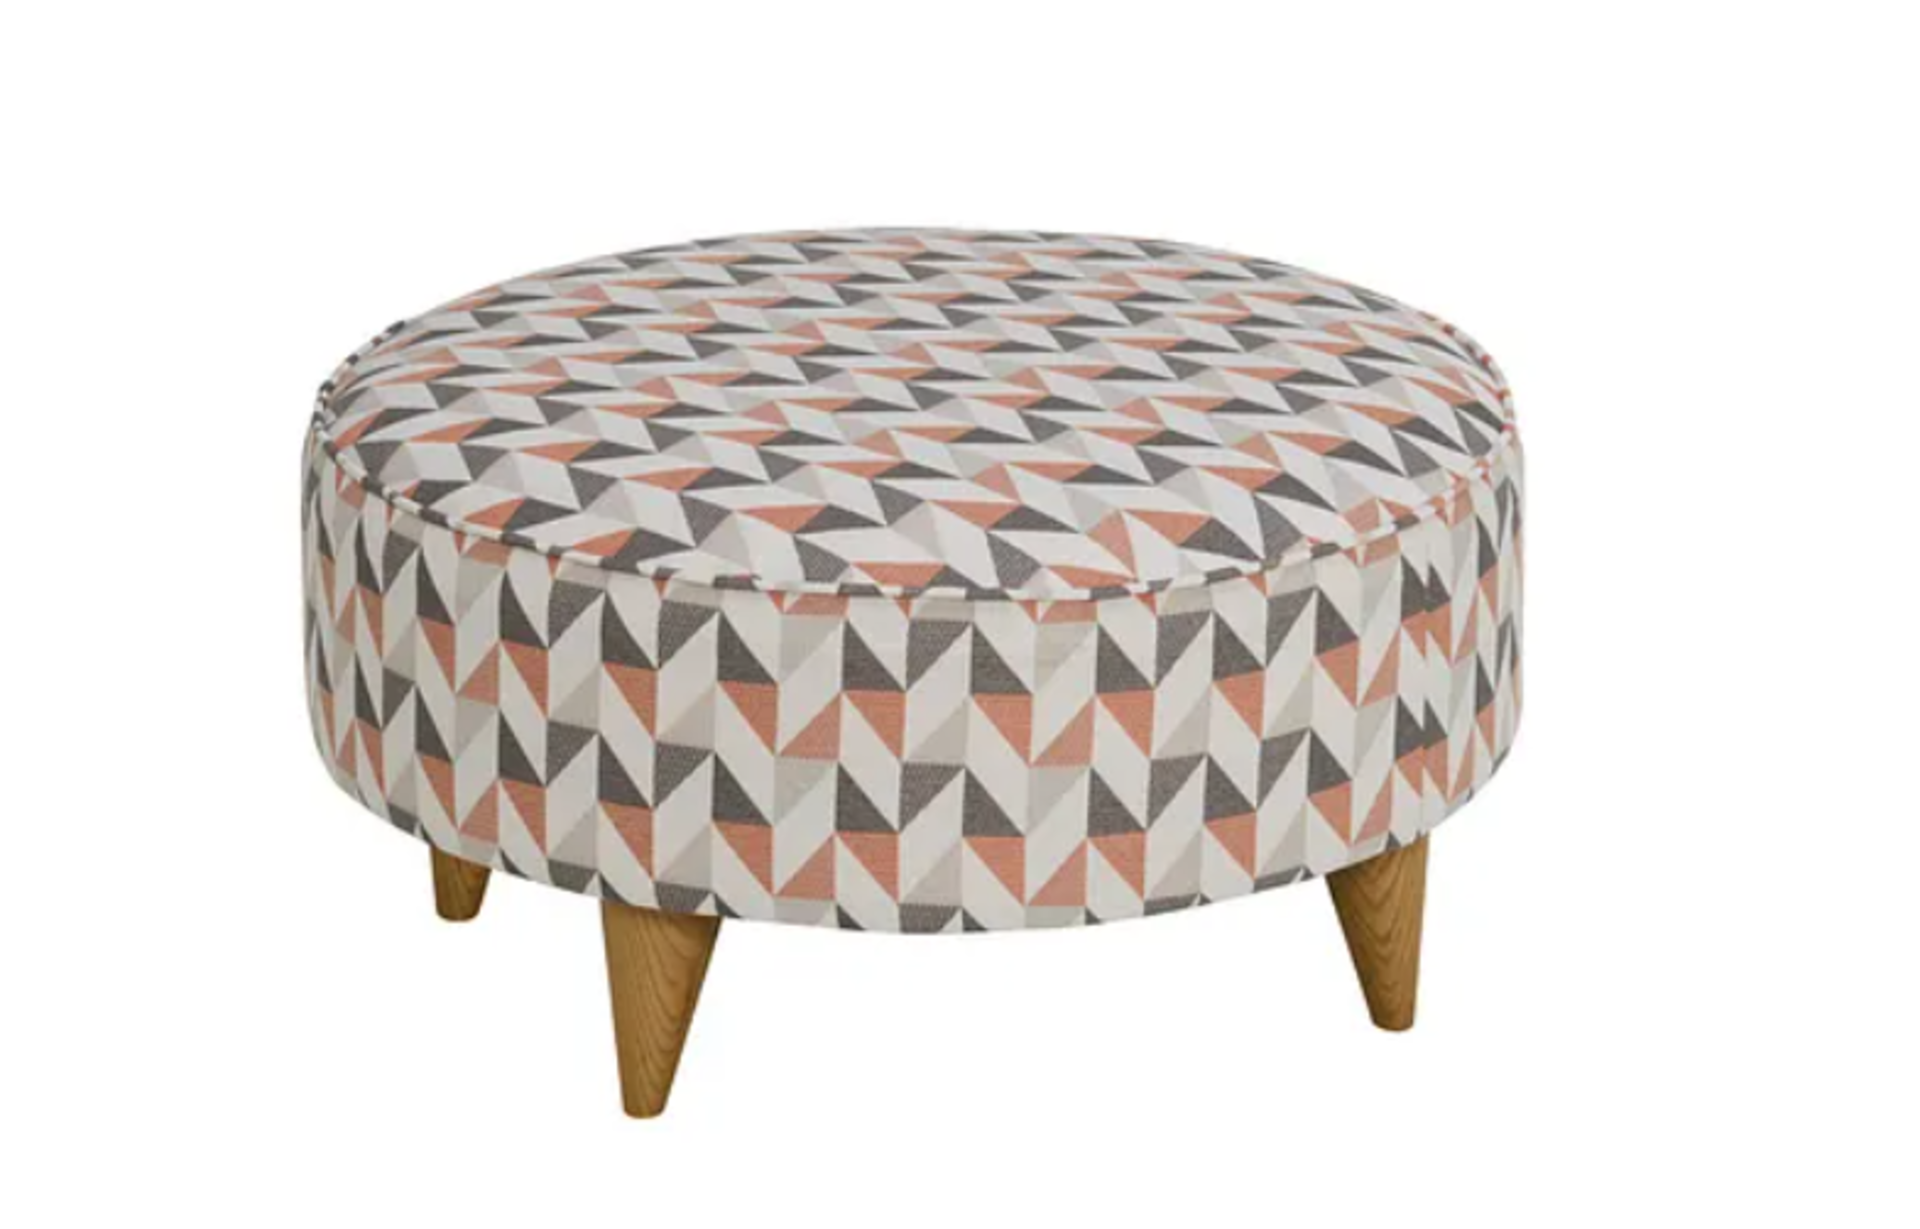 JENSEN Round Footstool | Coral Fabric. RRP £429.99. Add a touch of Scandi influence to your home